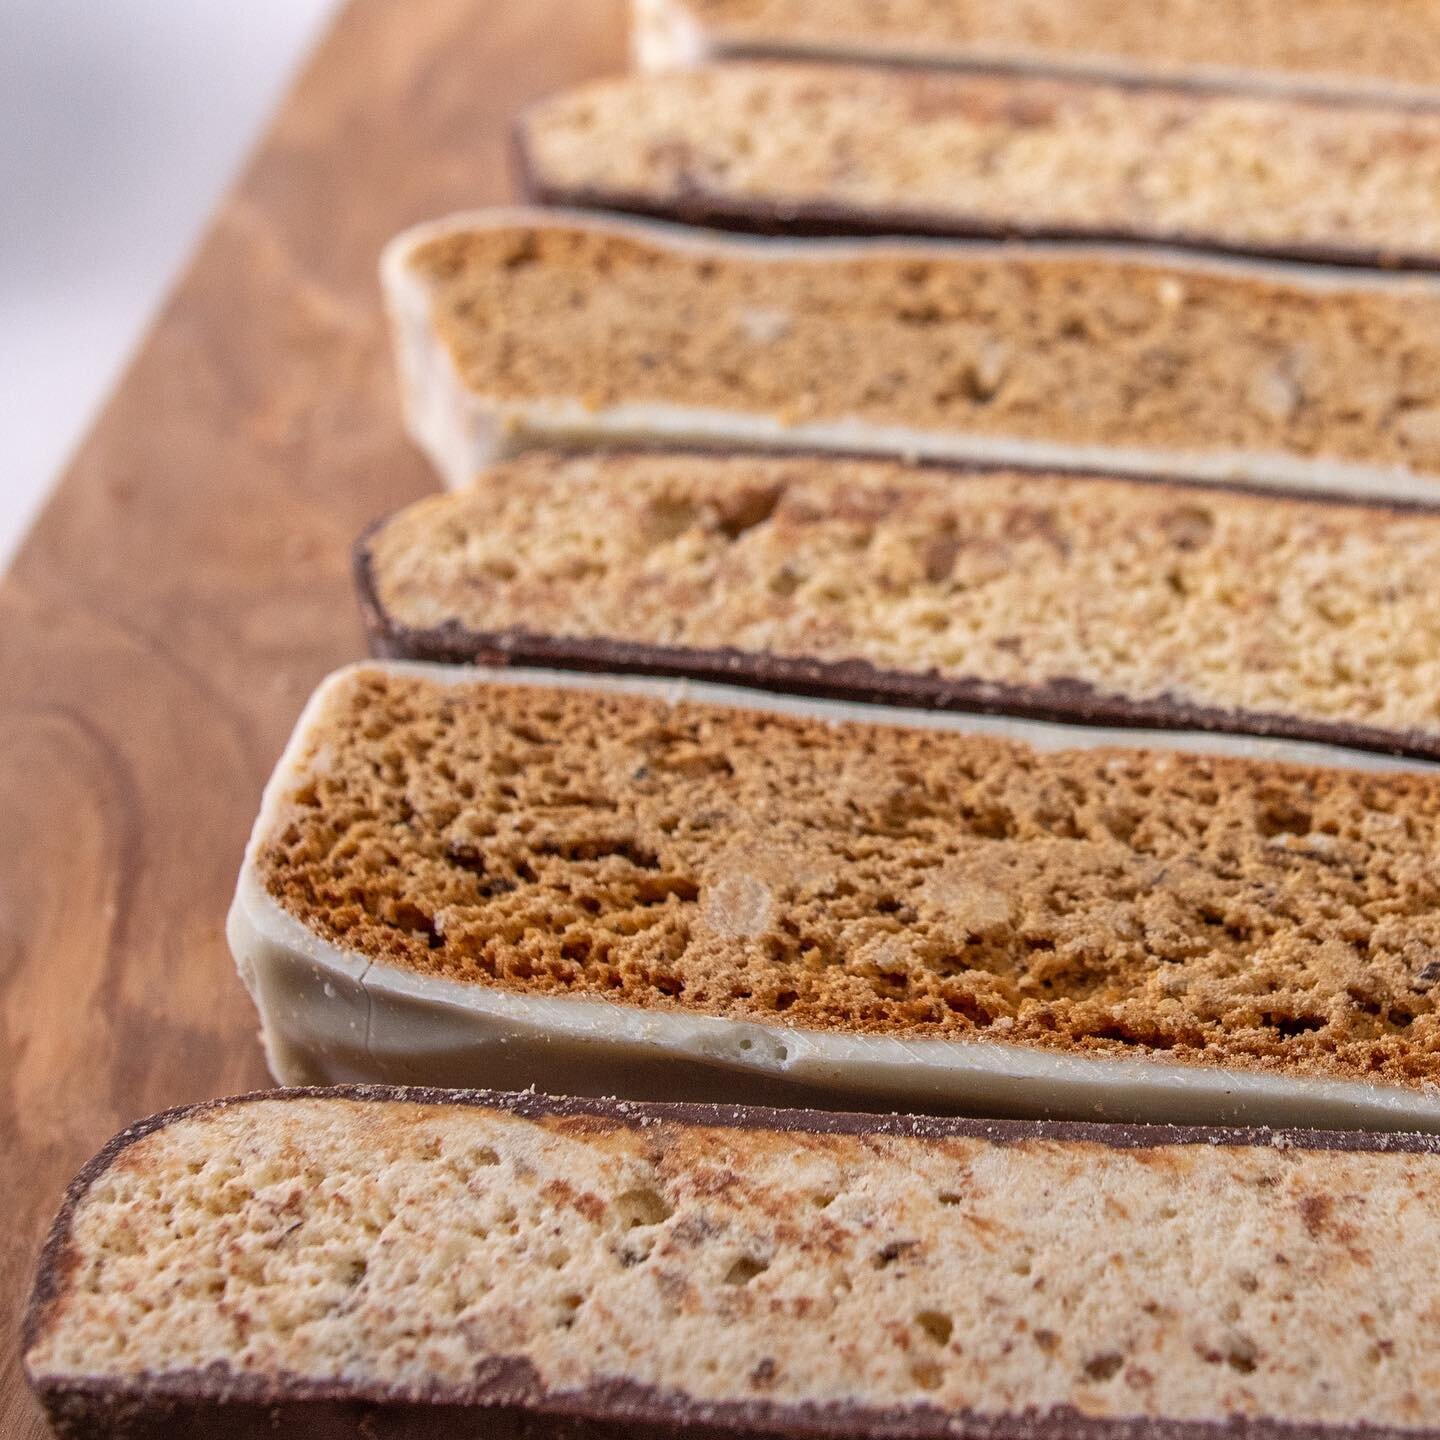 Sometimes you need a little something to make your week sweeter! Try one of our delicious almond biscotti to sweeten up your week!